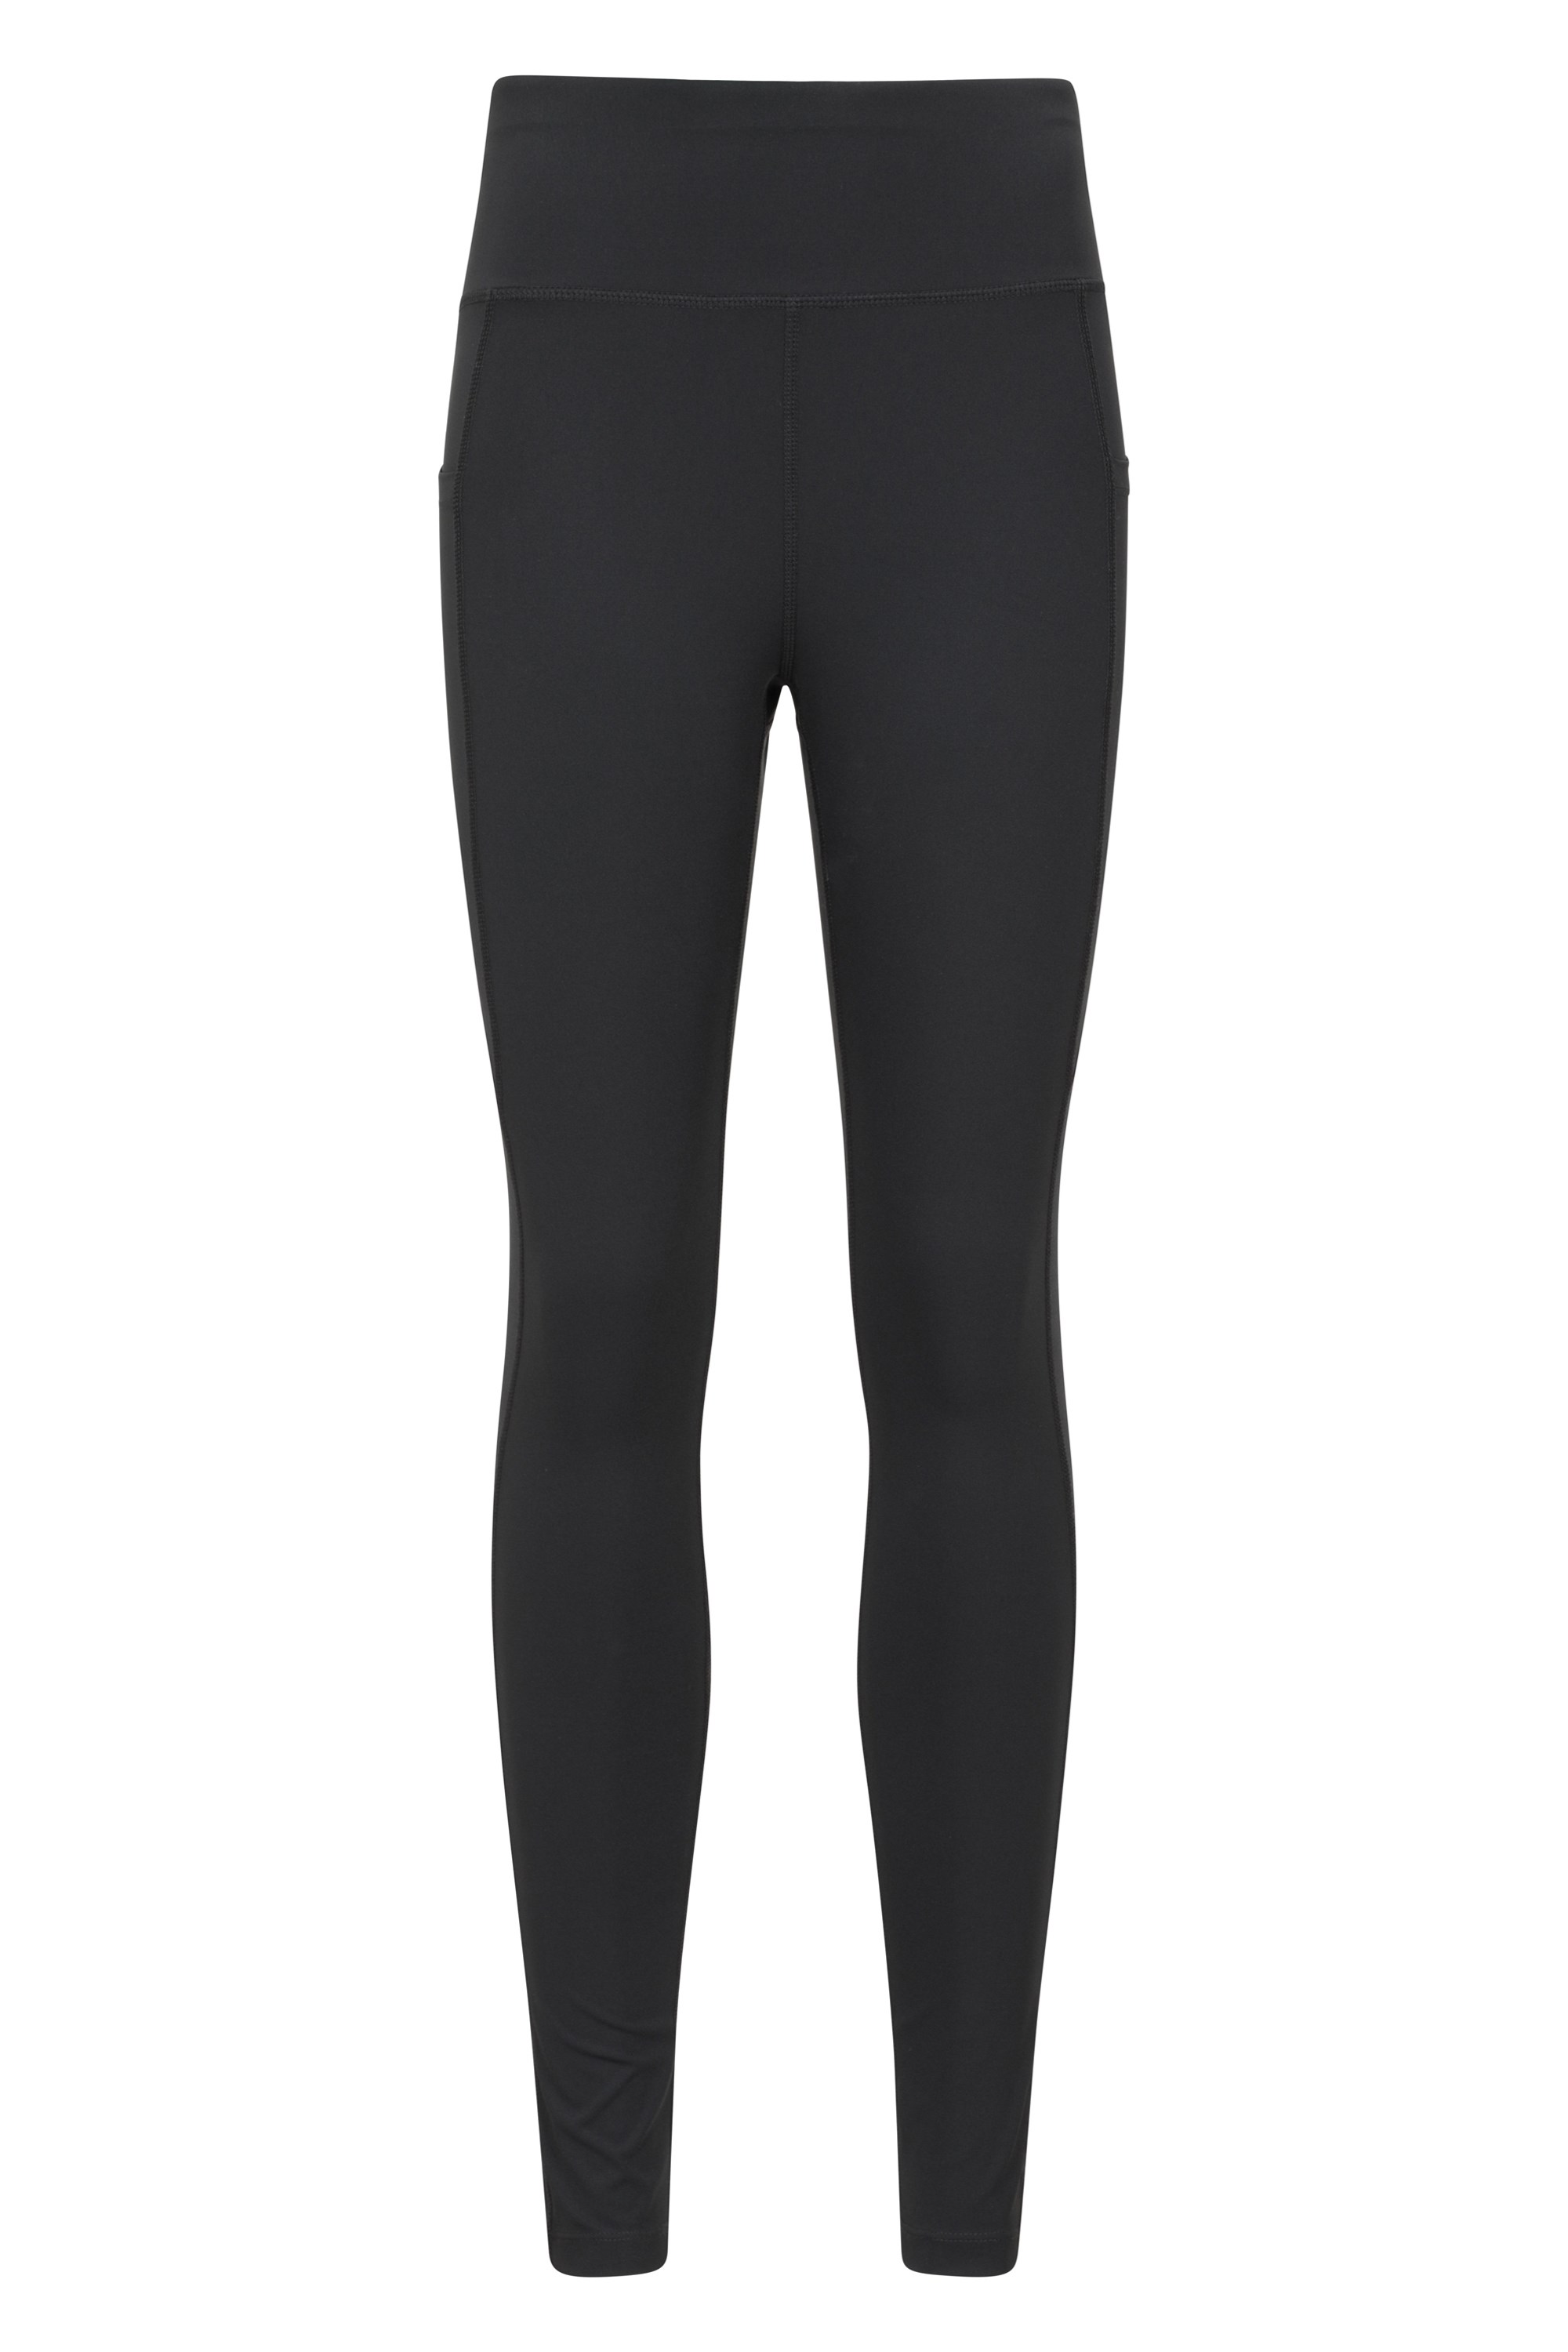 Black Leggings in Lagos for sale ▷ Prices on